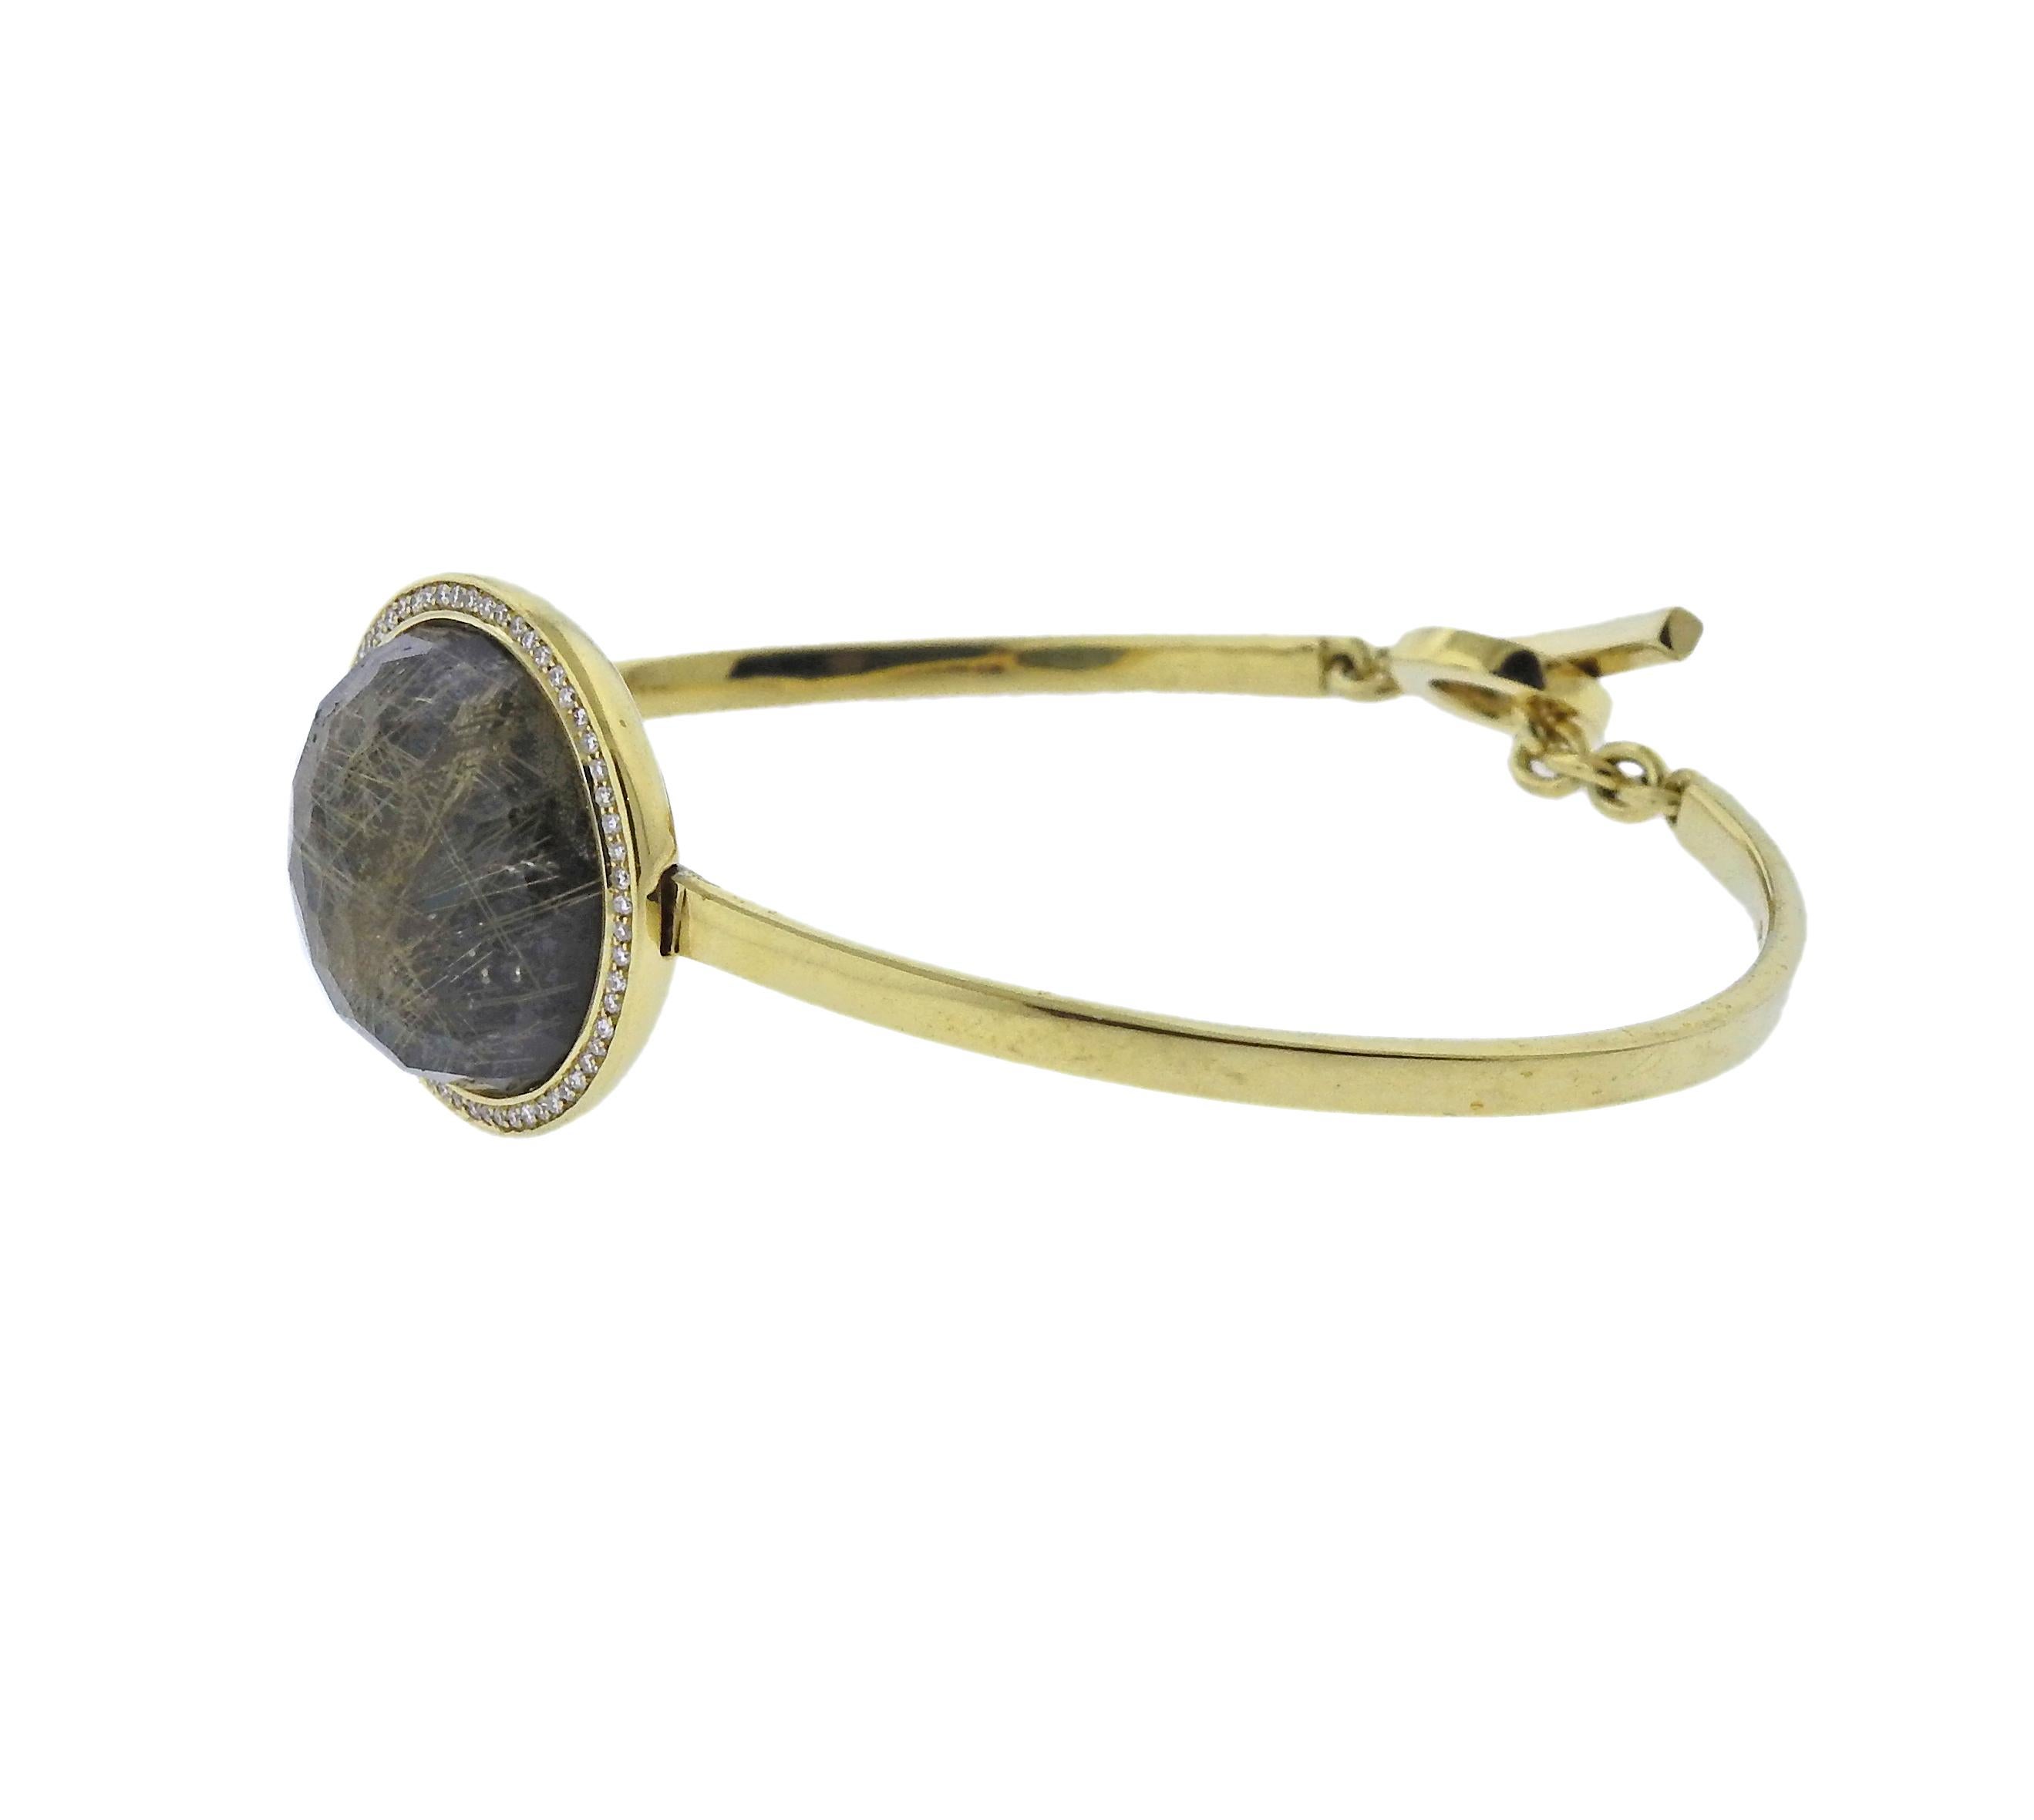 18k gold toggle bracelet by Ippolita, featuring rutilated quartz, hematite, surrounded approx. 0.25ctw in diamonds. Bracelet will fit up to 7